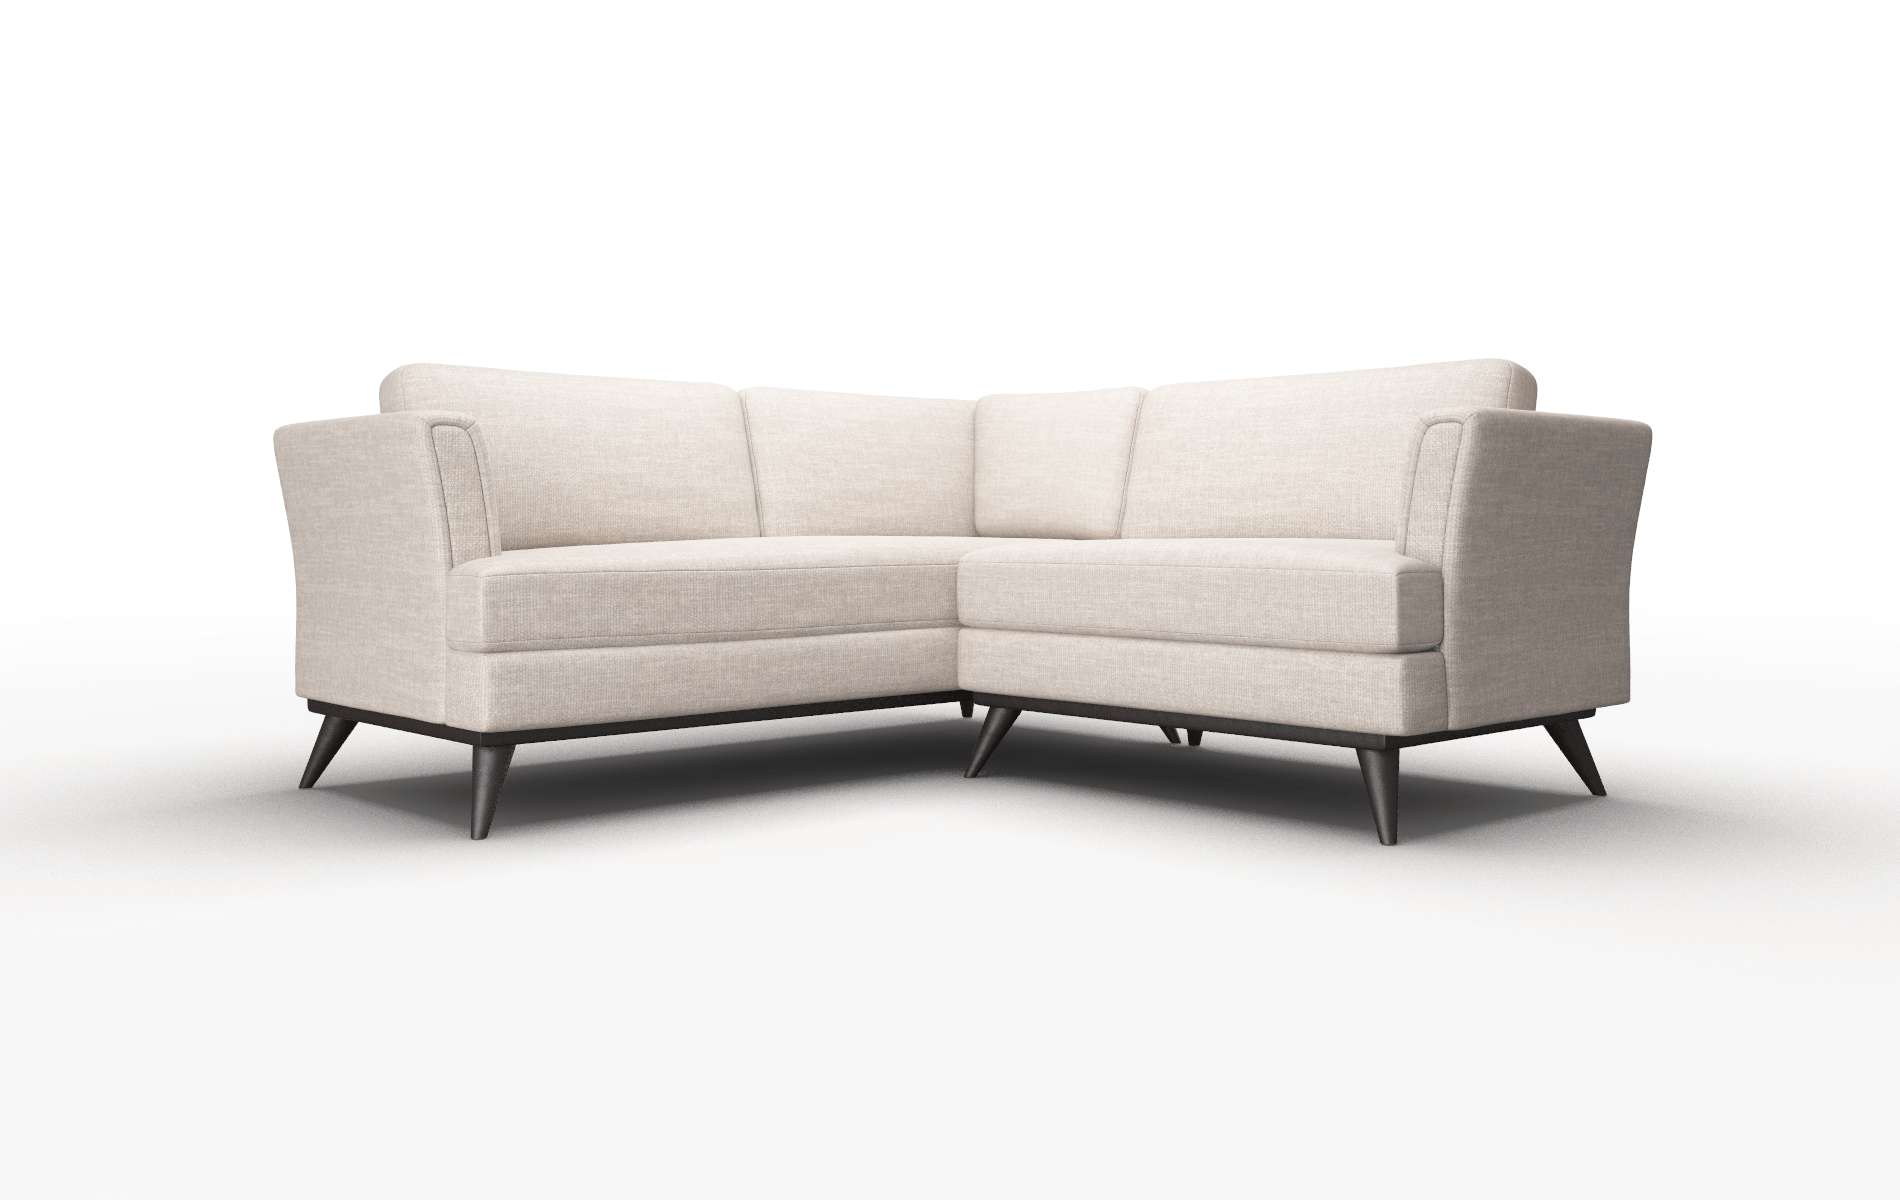 Antalya Clyde Dolphin Sectional espresso legs